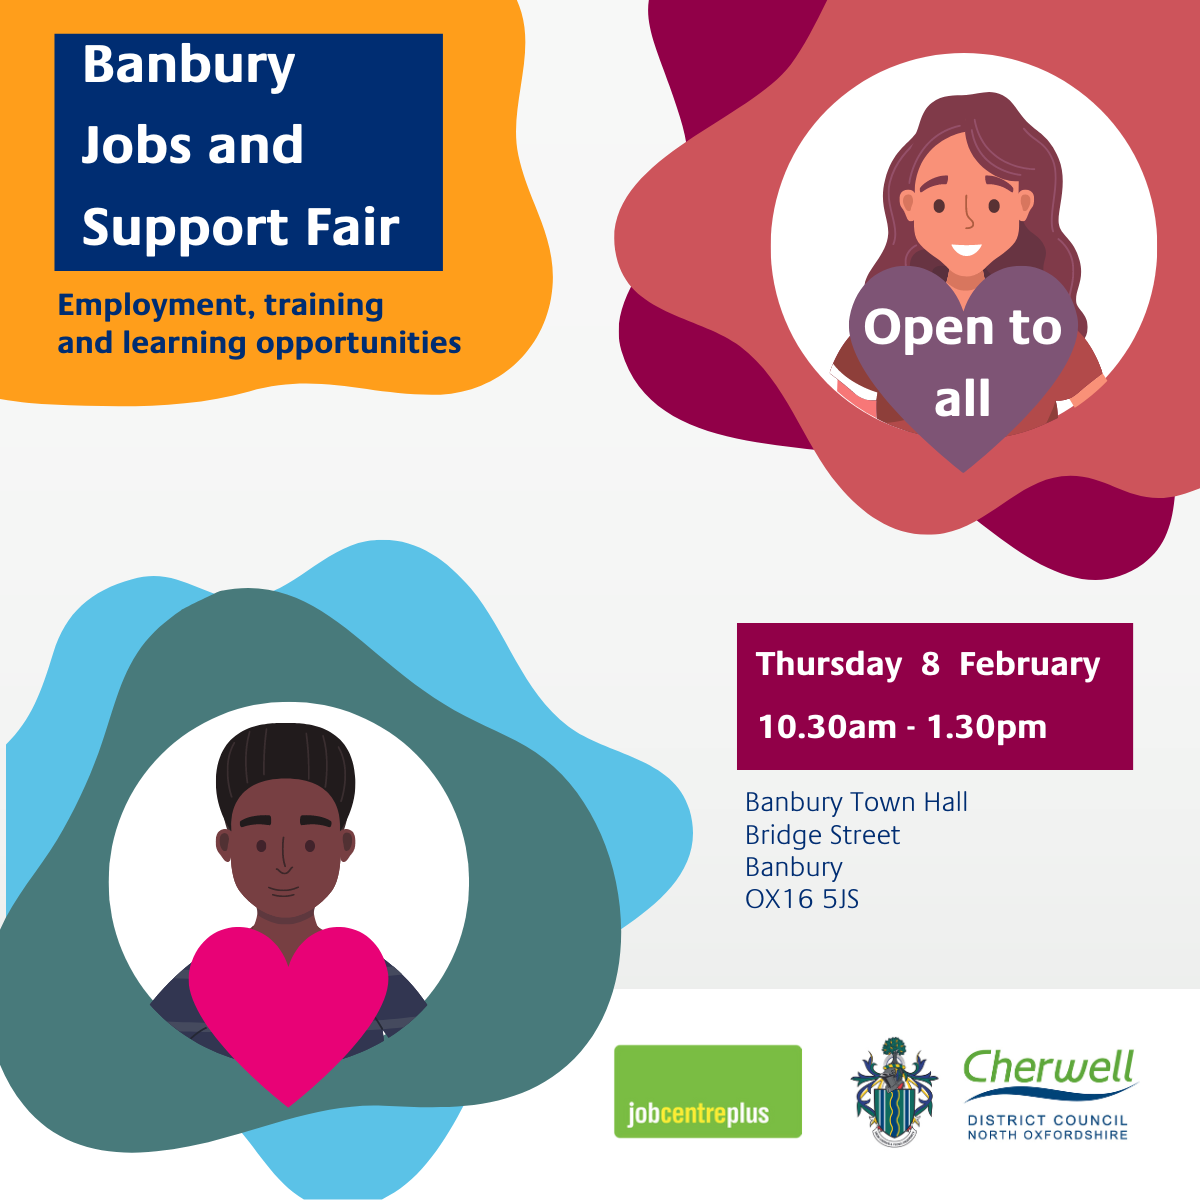 Banbury jobs and support fair will run from 10.30am to 1.30pm on Thursday 8 February at Banbury Town Hall.